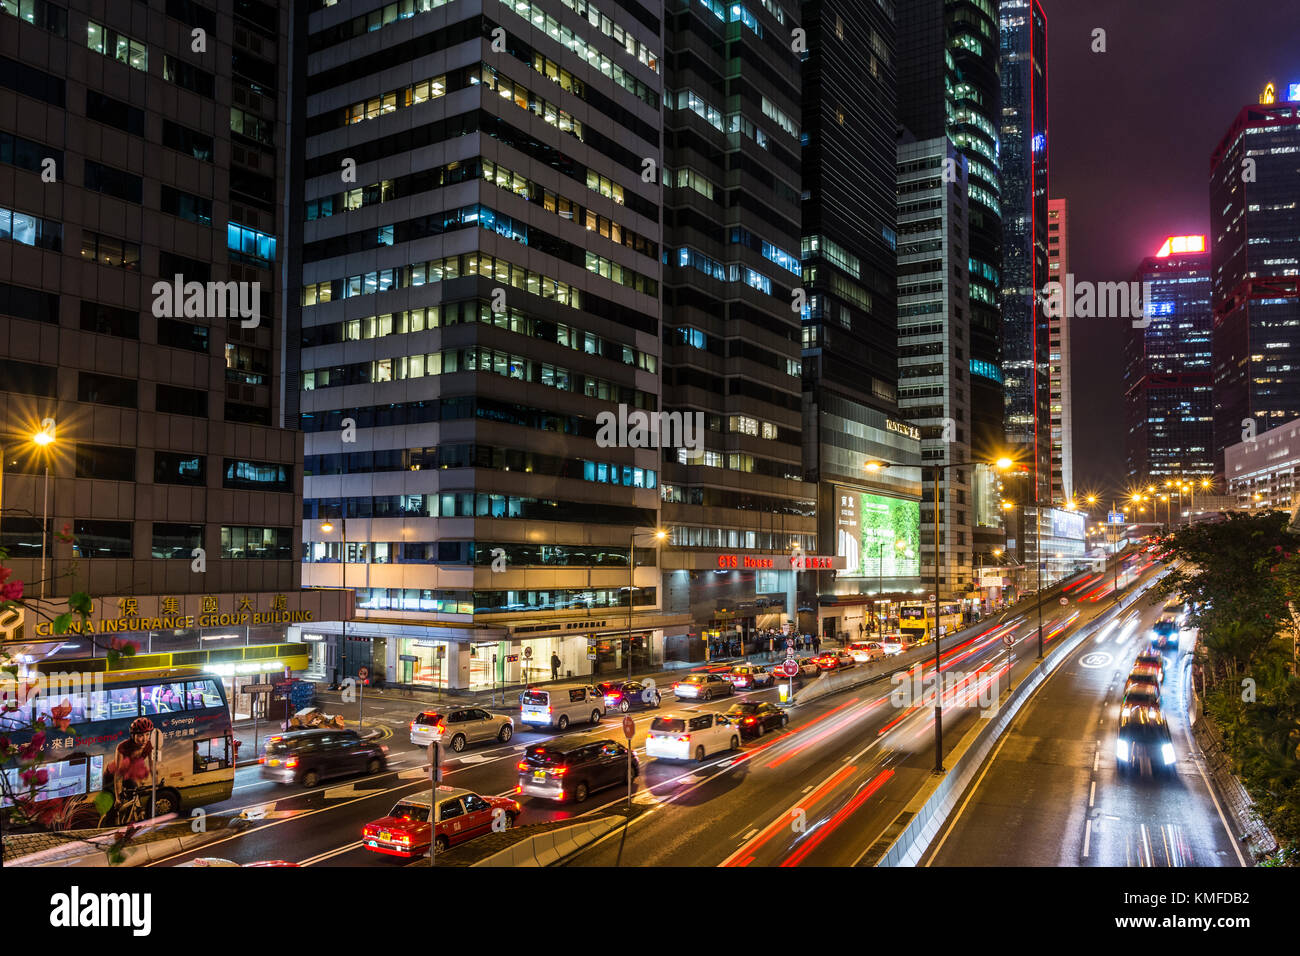 A night view of the traffic in the streets of Hong Kong Island Stock Photo